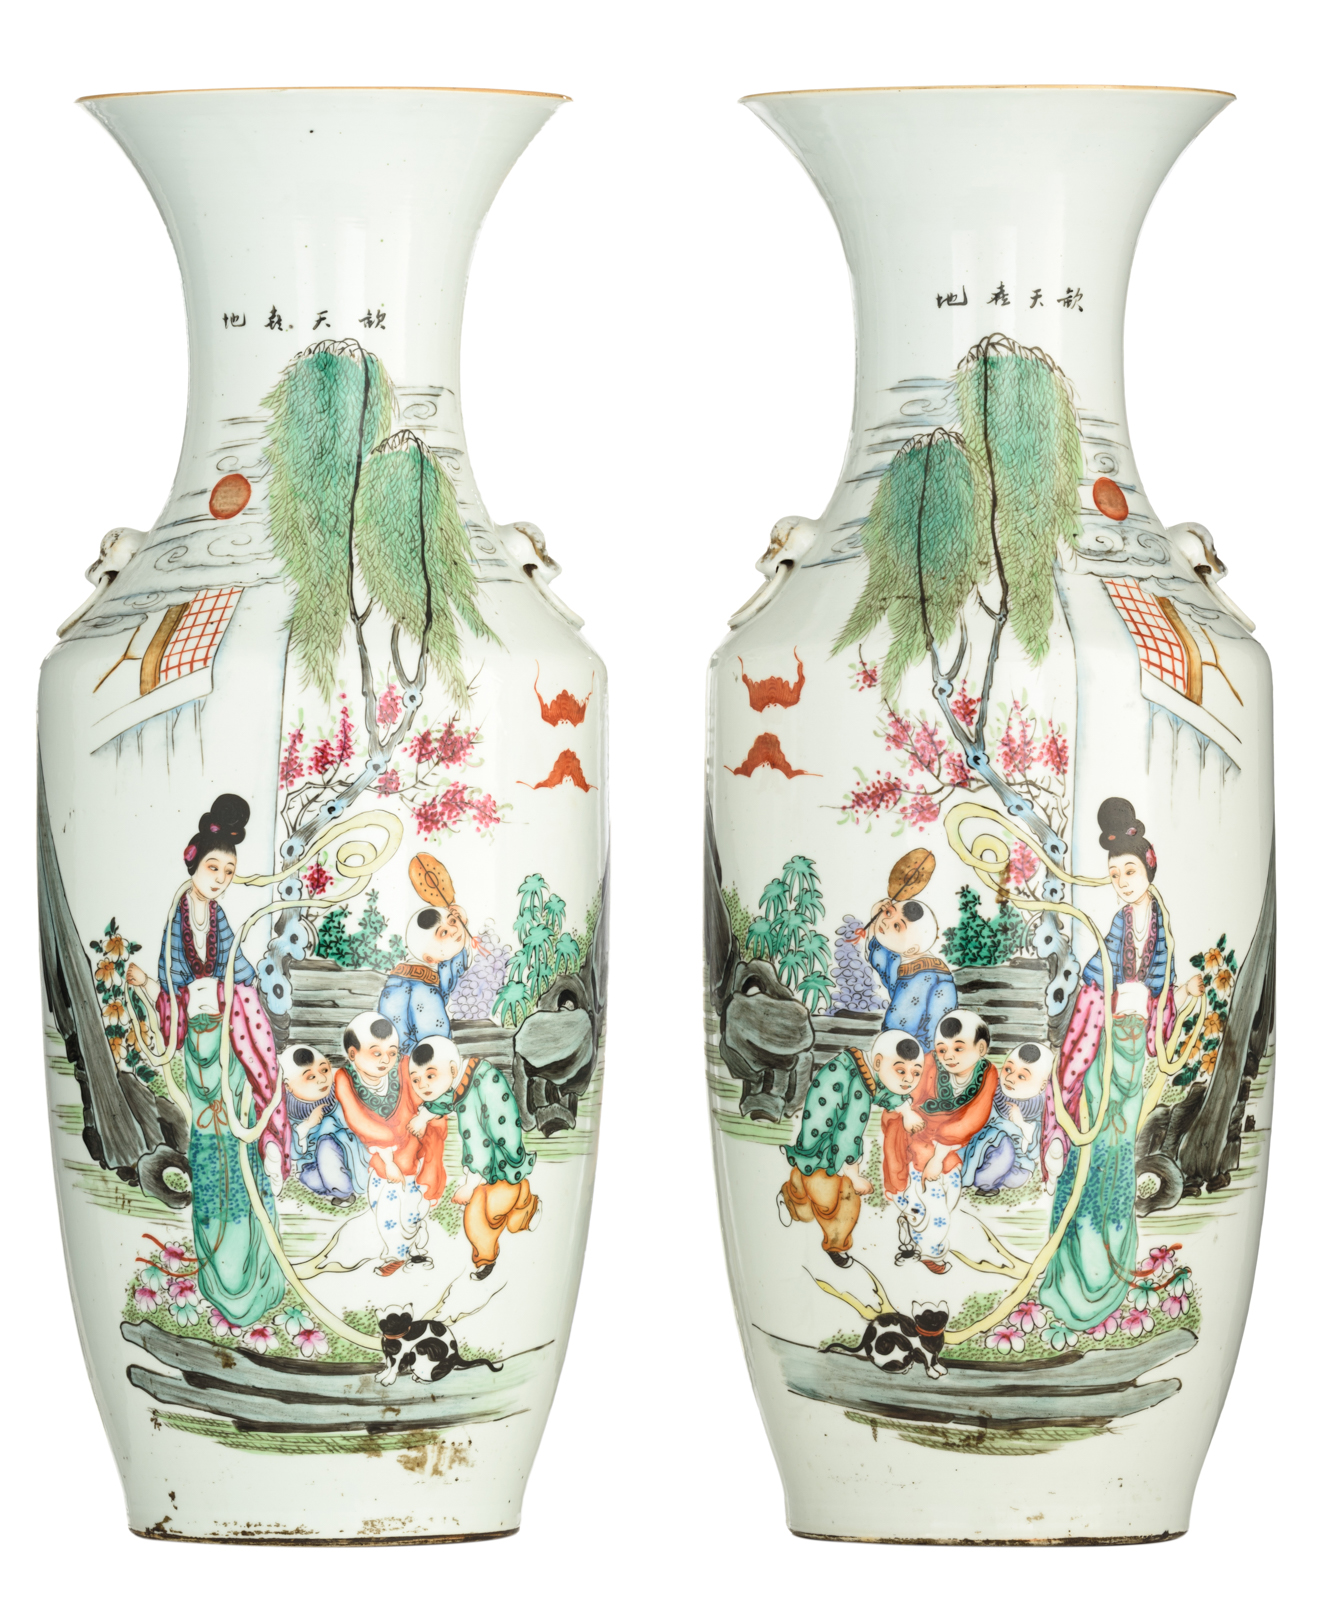 A pair of Chinese famille rose vases, decorated with an animated scene, 19thC, H 57,5 cm